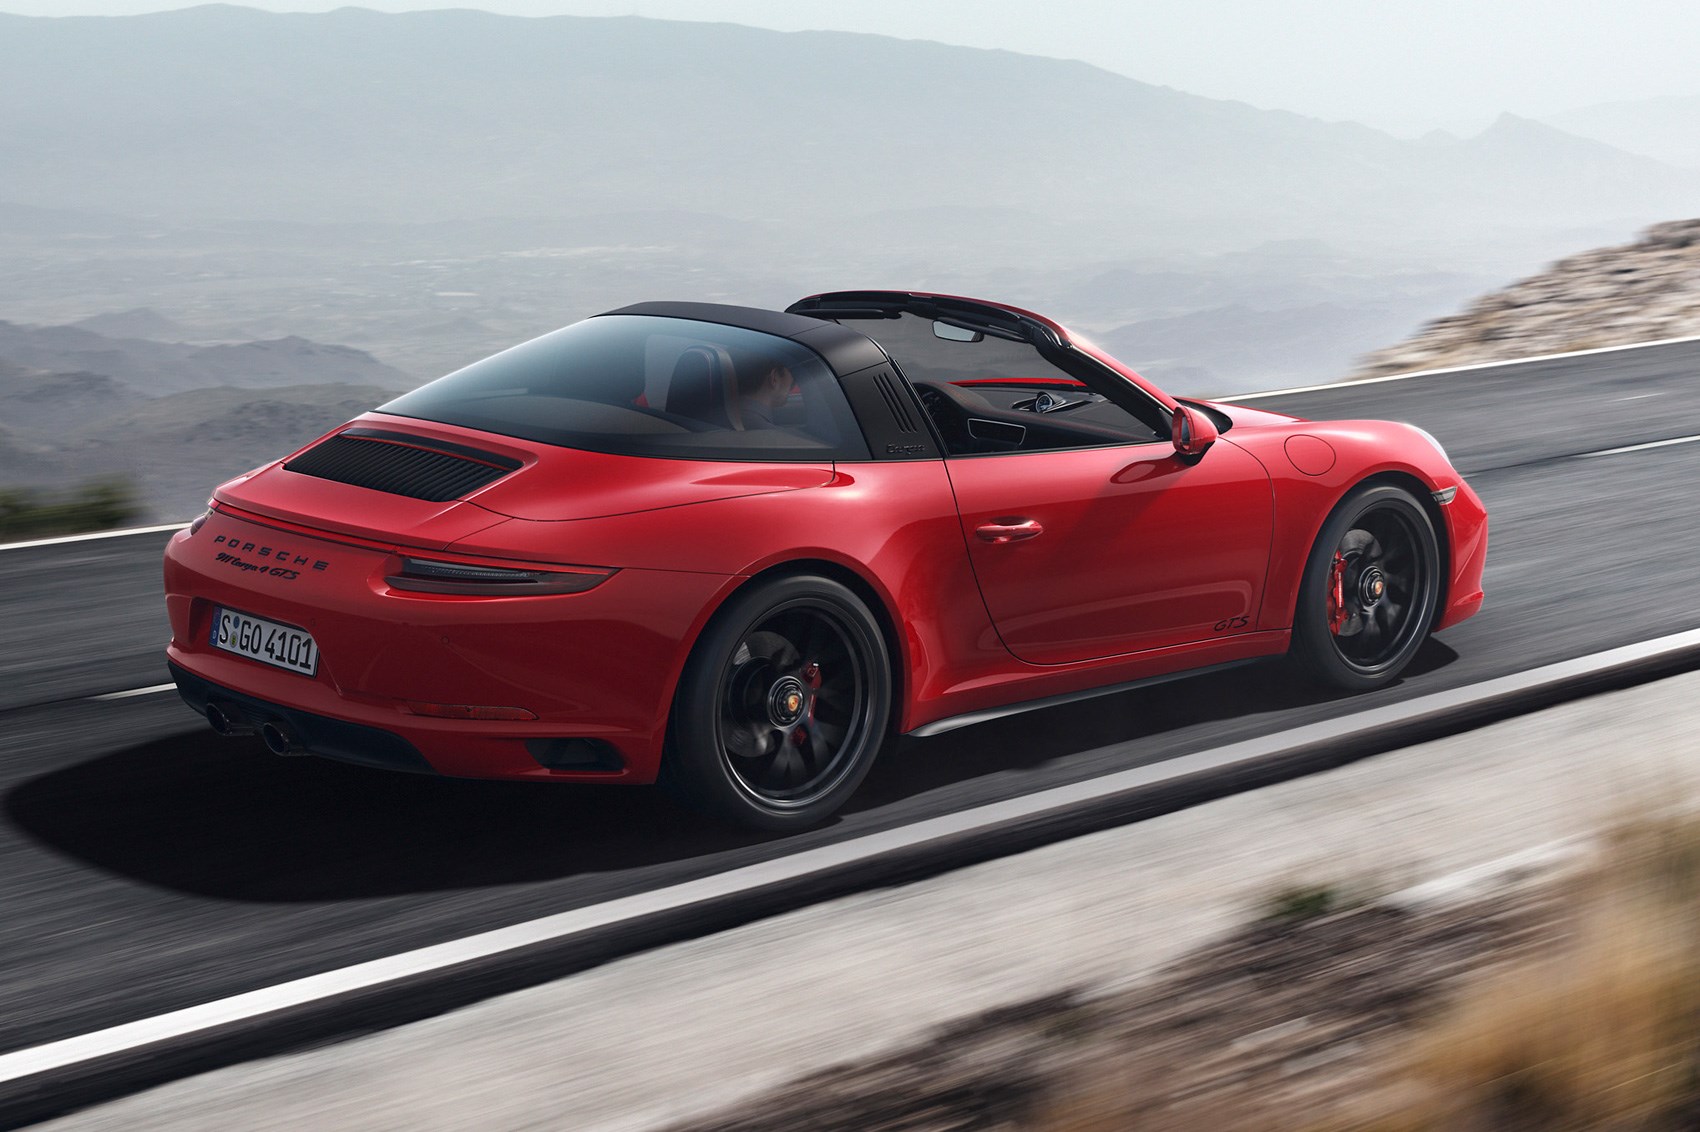 New 2017 Porsche 991.2 GTS revealed: the pick of the 'normal' 911 range?